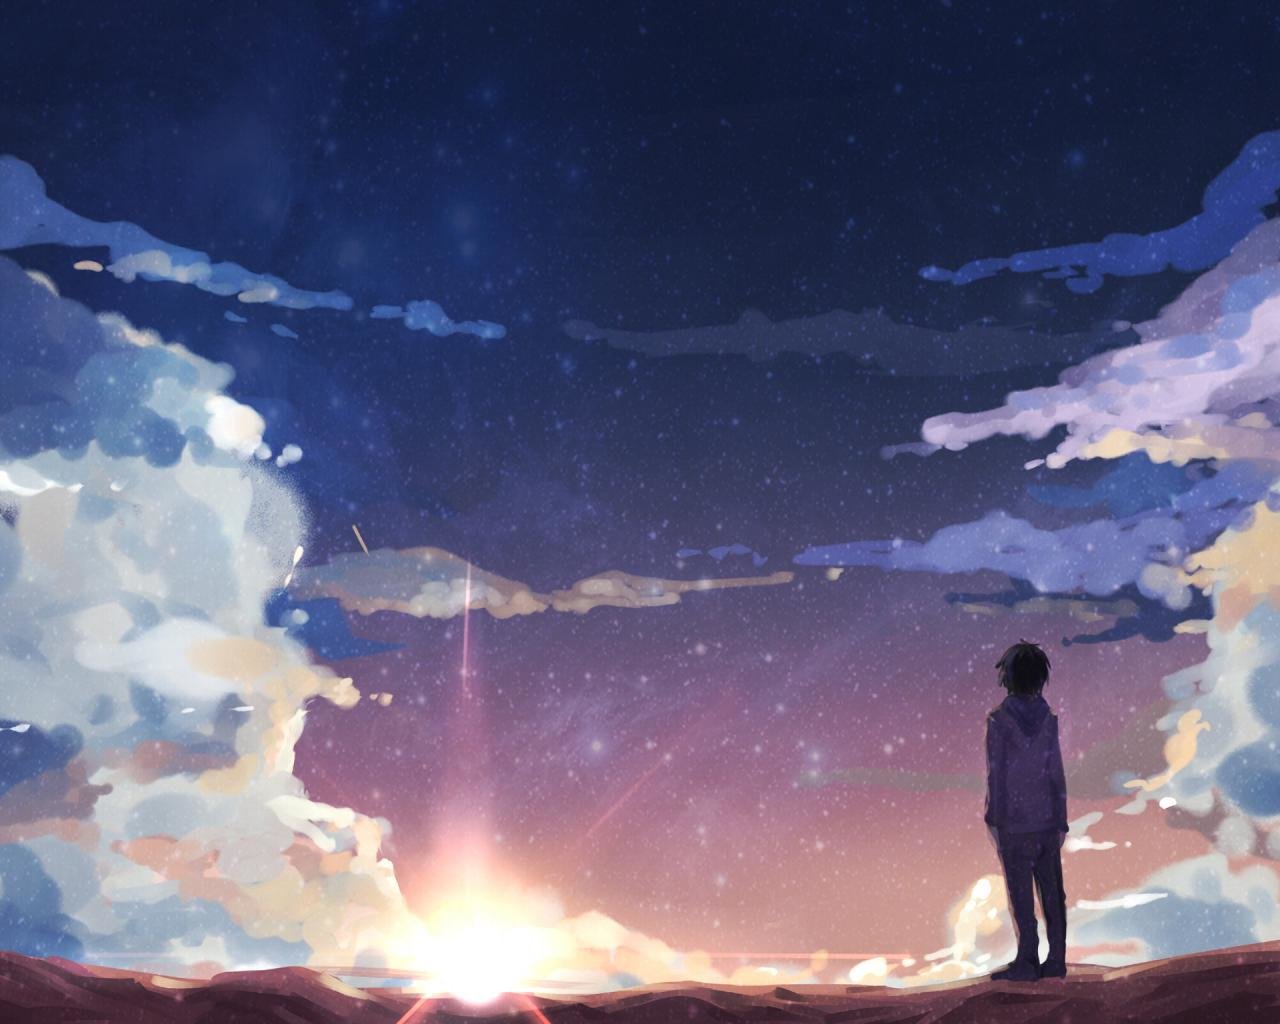 your name wallpapers 1280x1024 desktop backgrounds wallpapers 1280x1024 desktop backgrounds